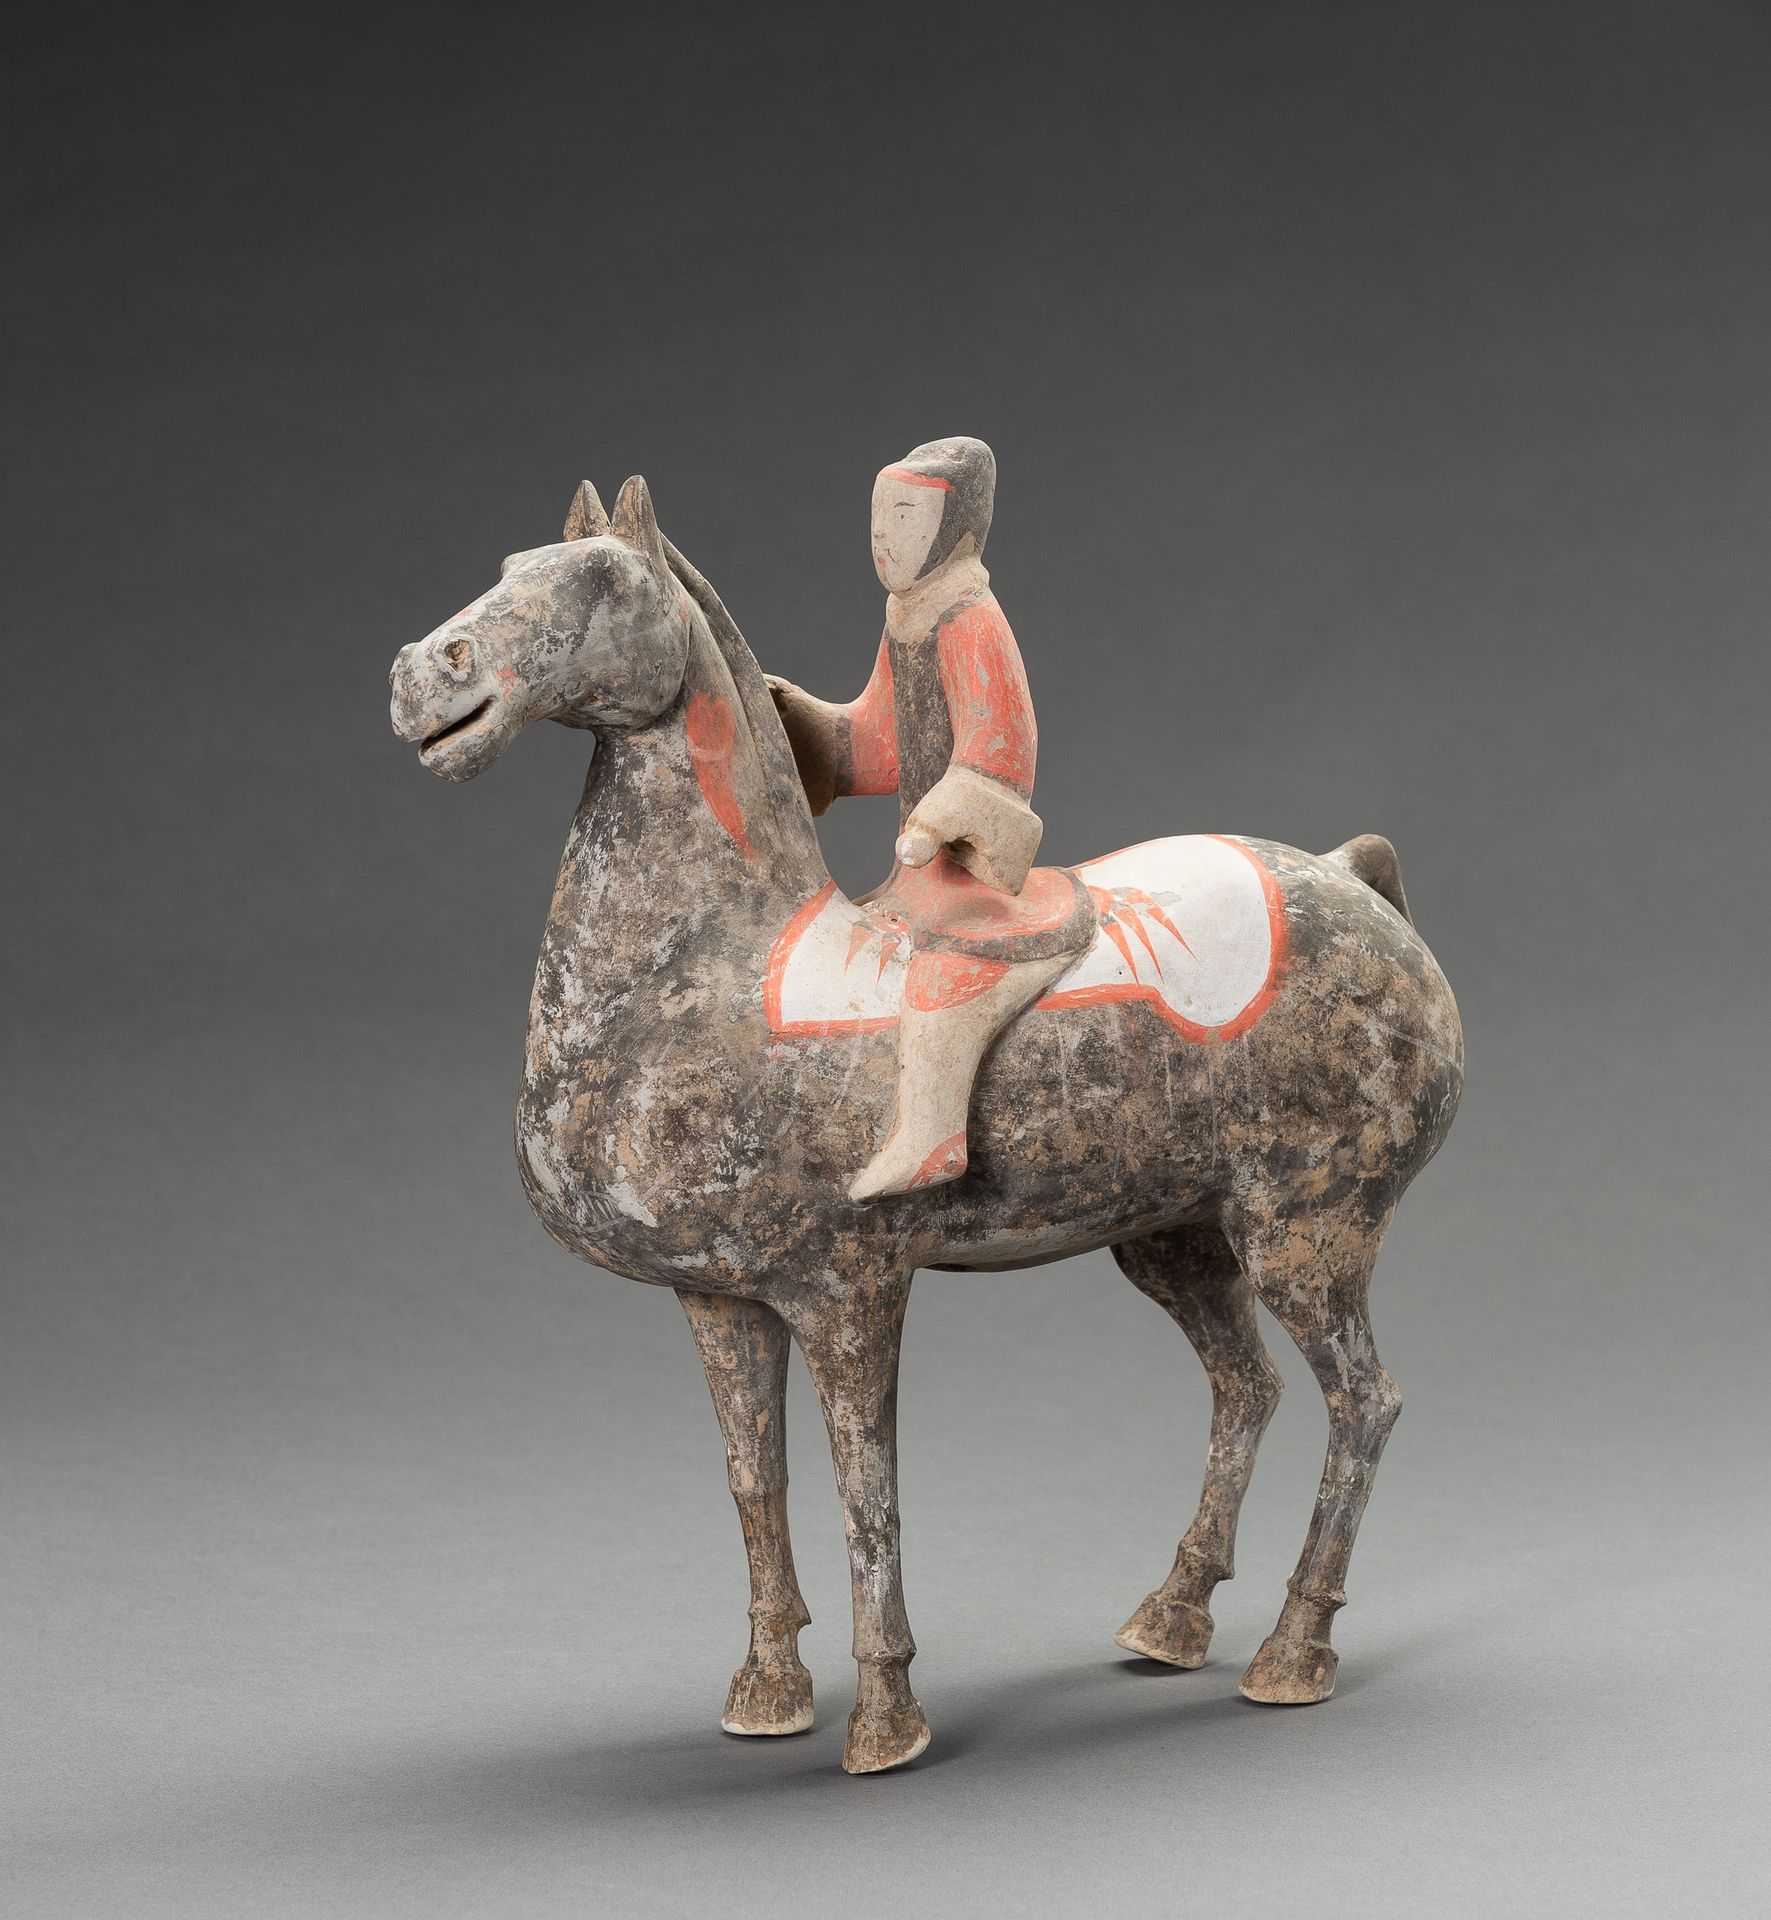 A PAINTED POTTERY HORSE AND RIDER, HAN DYNASTY 汉代彩绘马及骑手
中国，汉代（公元前206年至公元220年）。这匹&hellip;